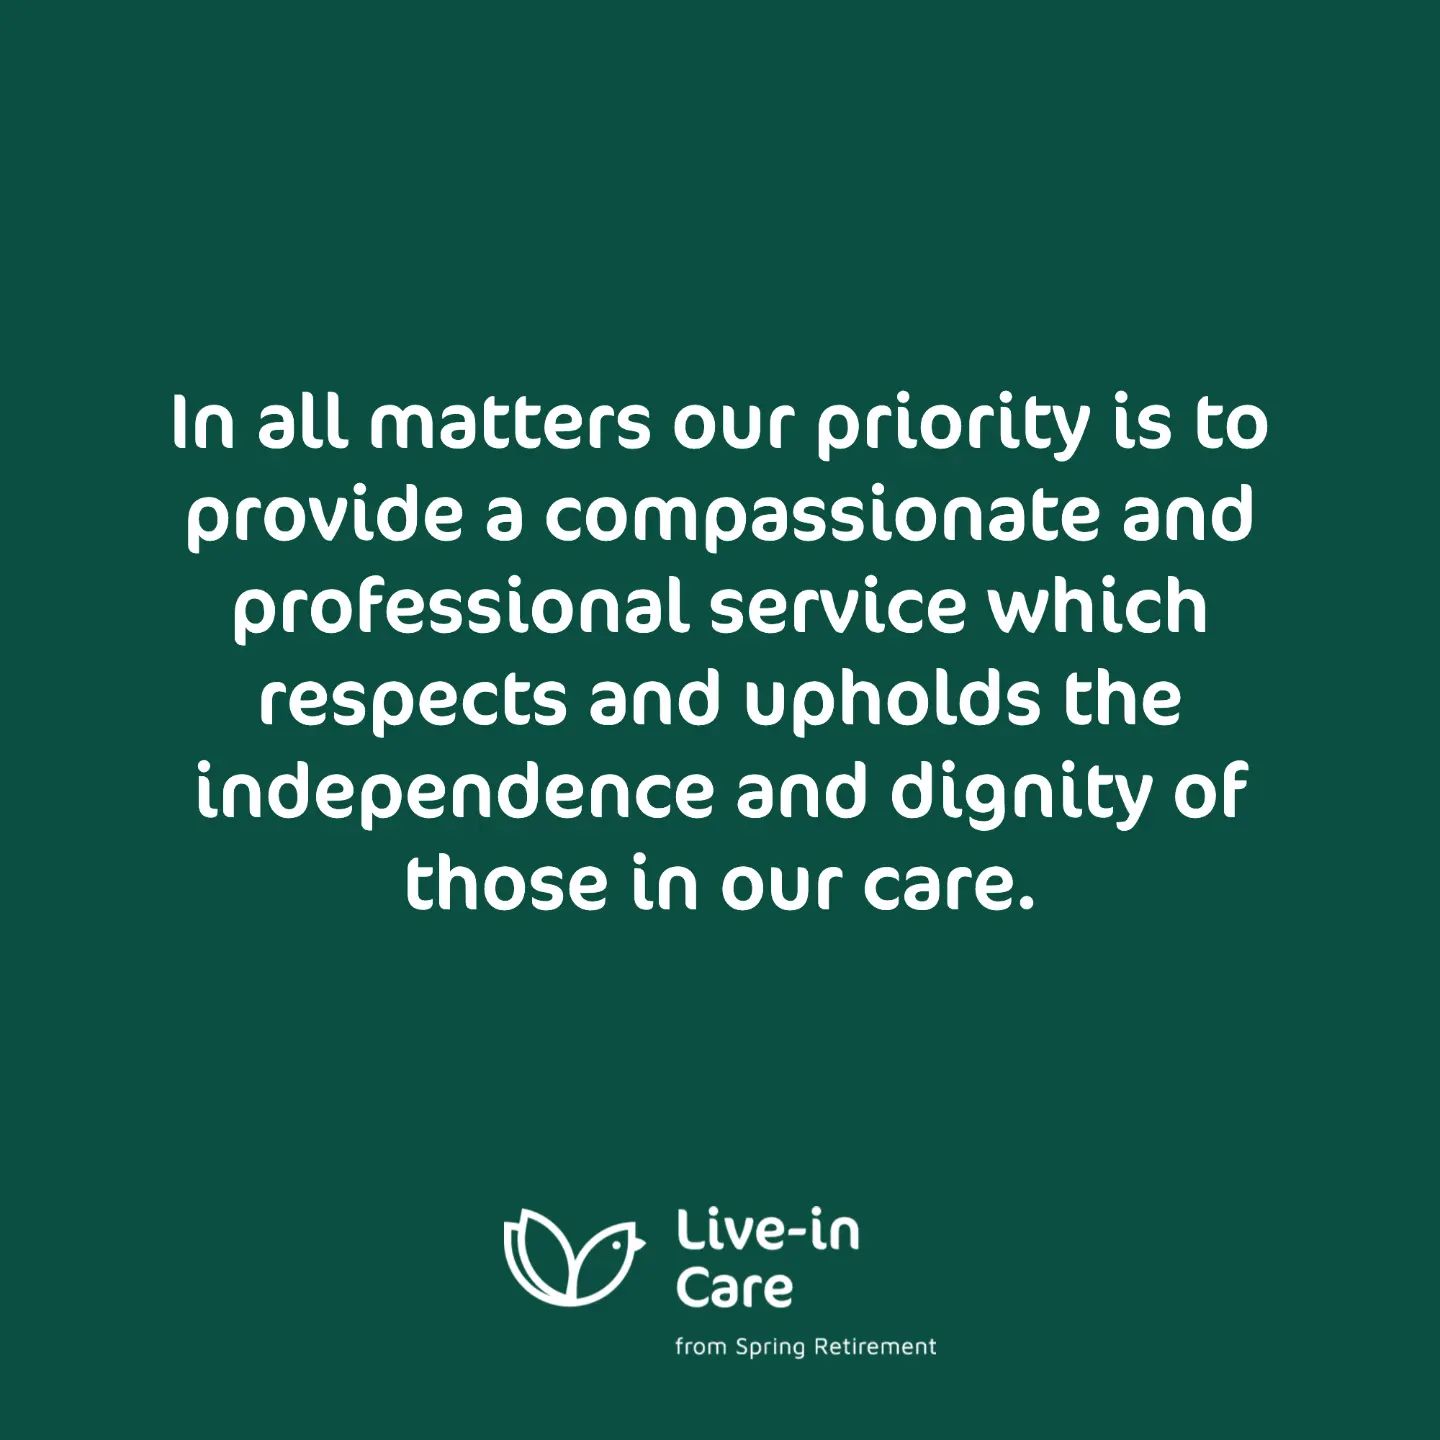 A mission statement on Live-in Care